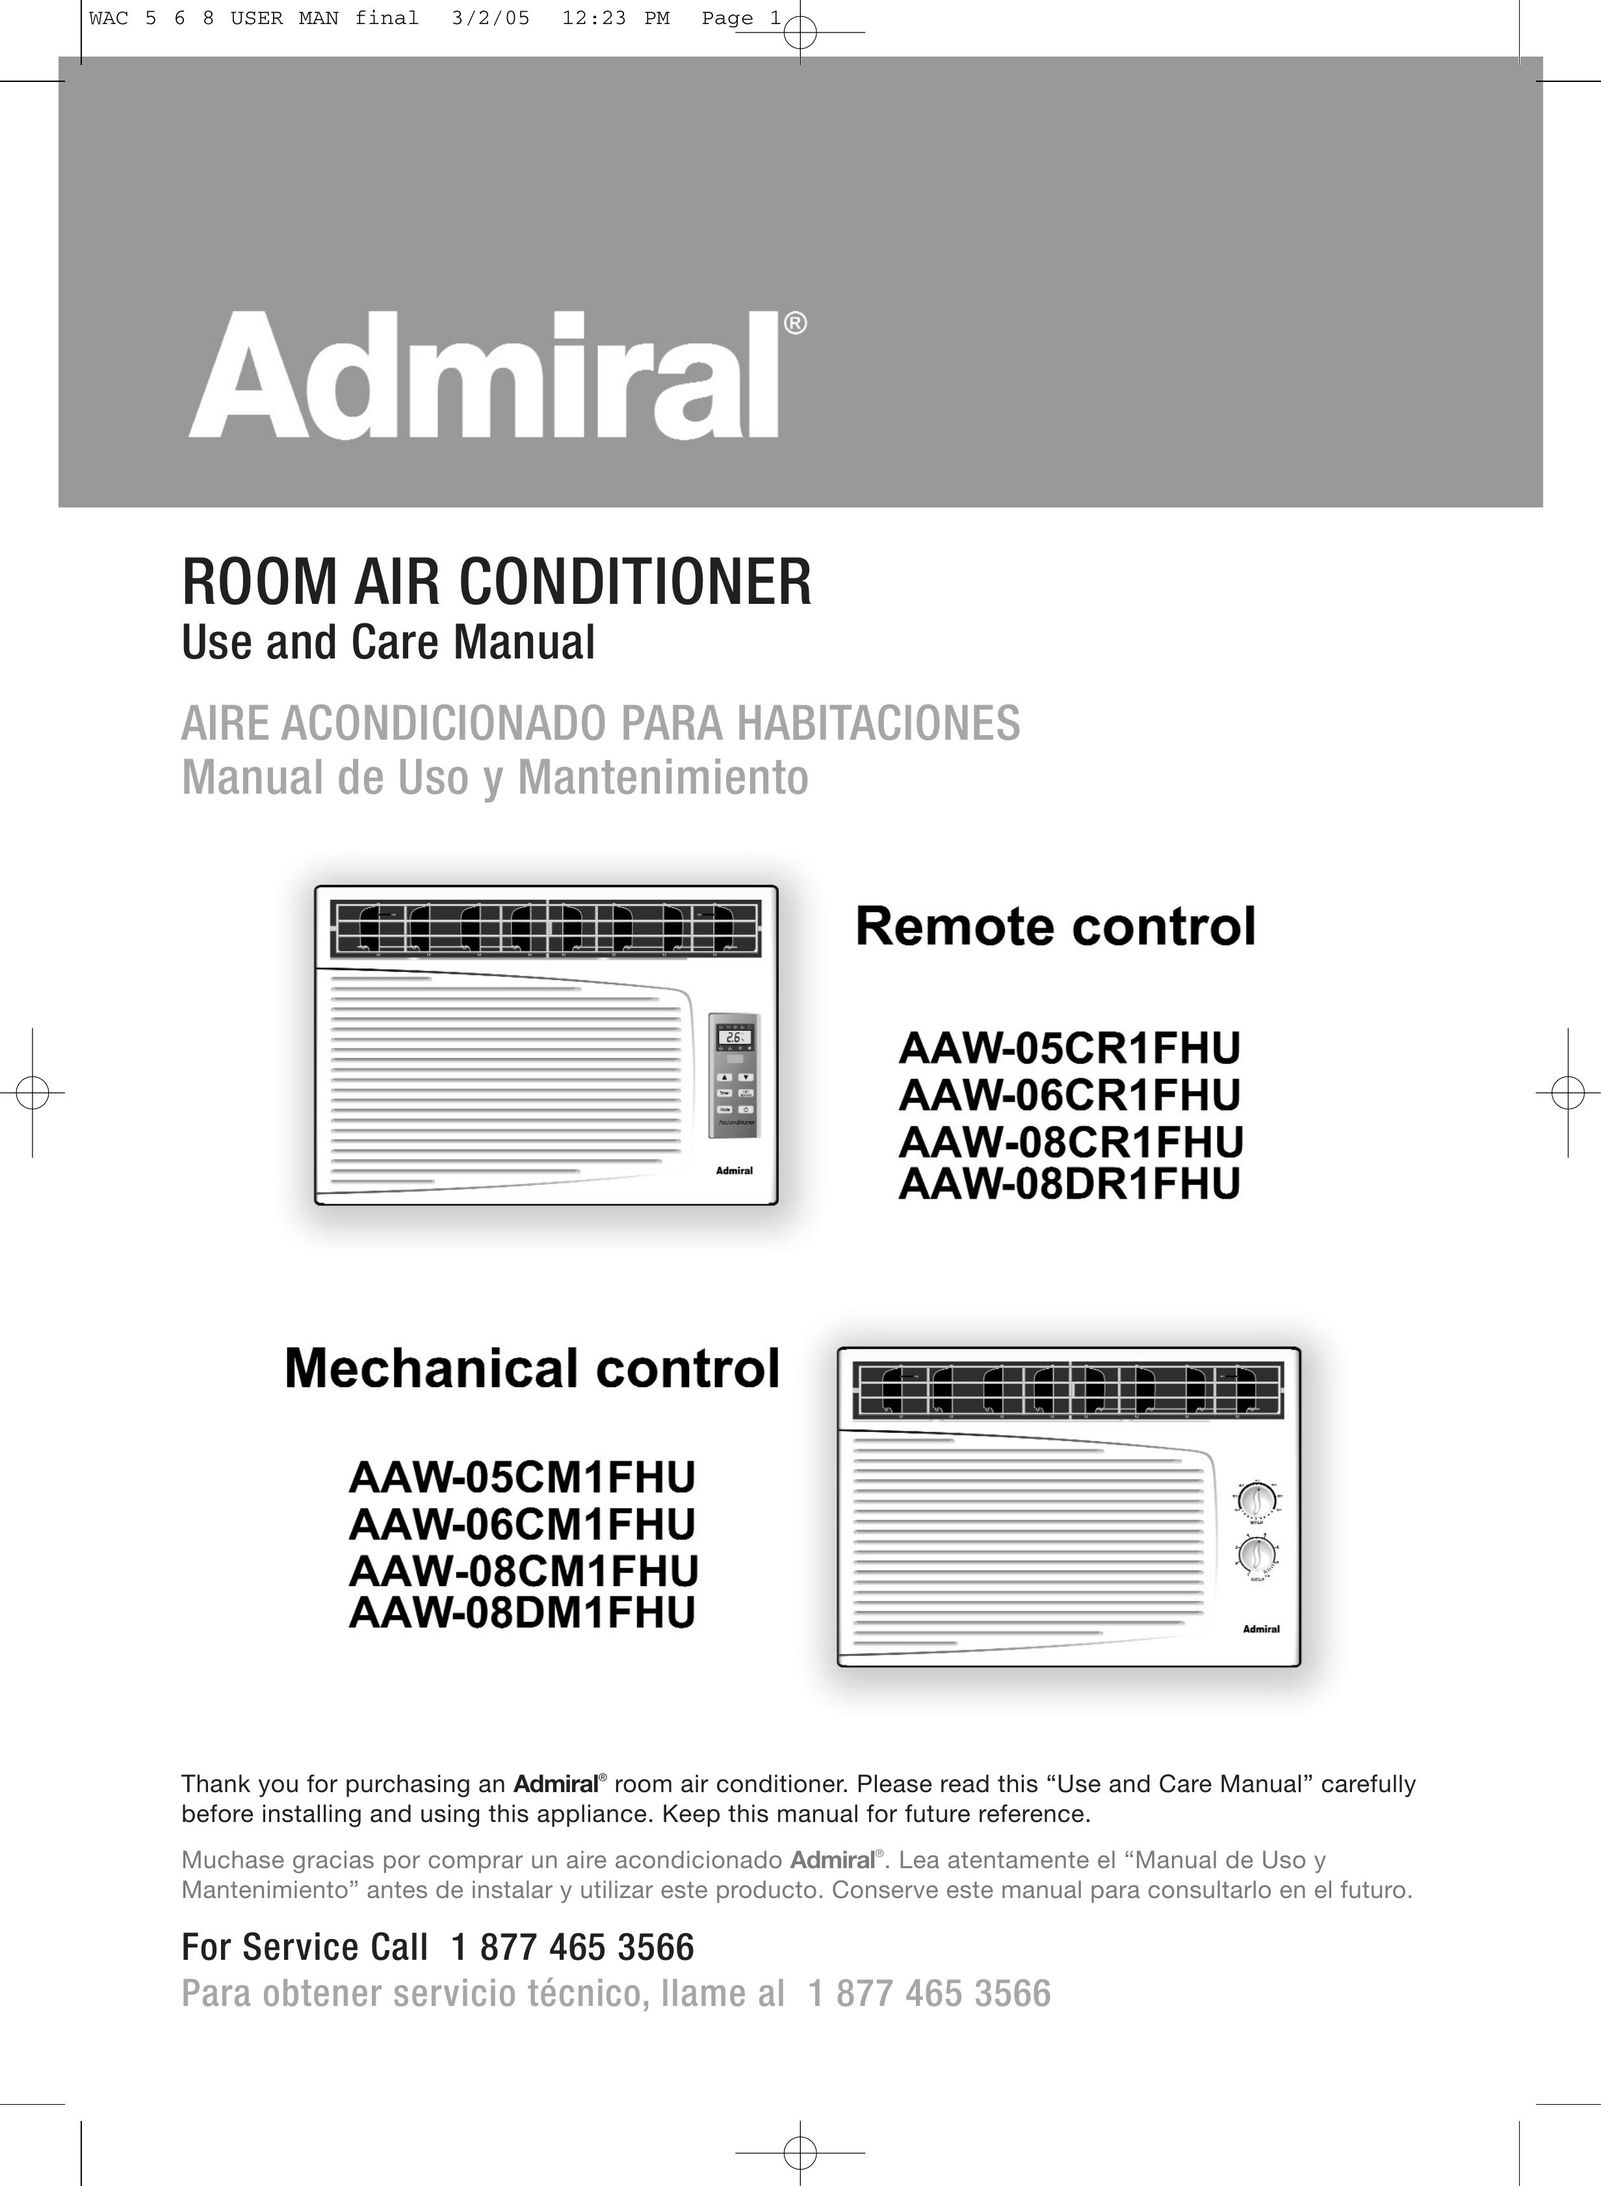 Admiral AAW-08DM1FHU Air Conditioner User Manual